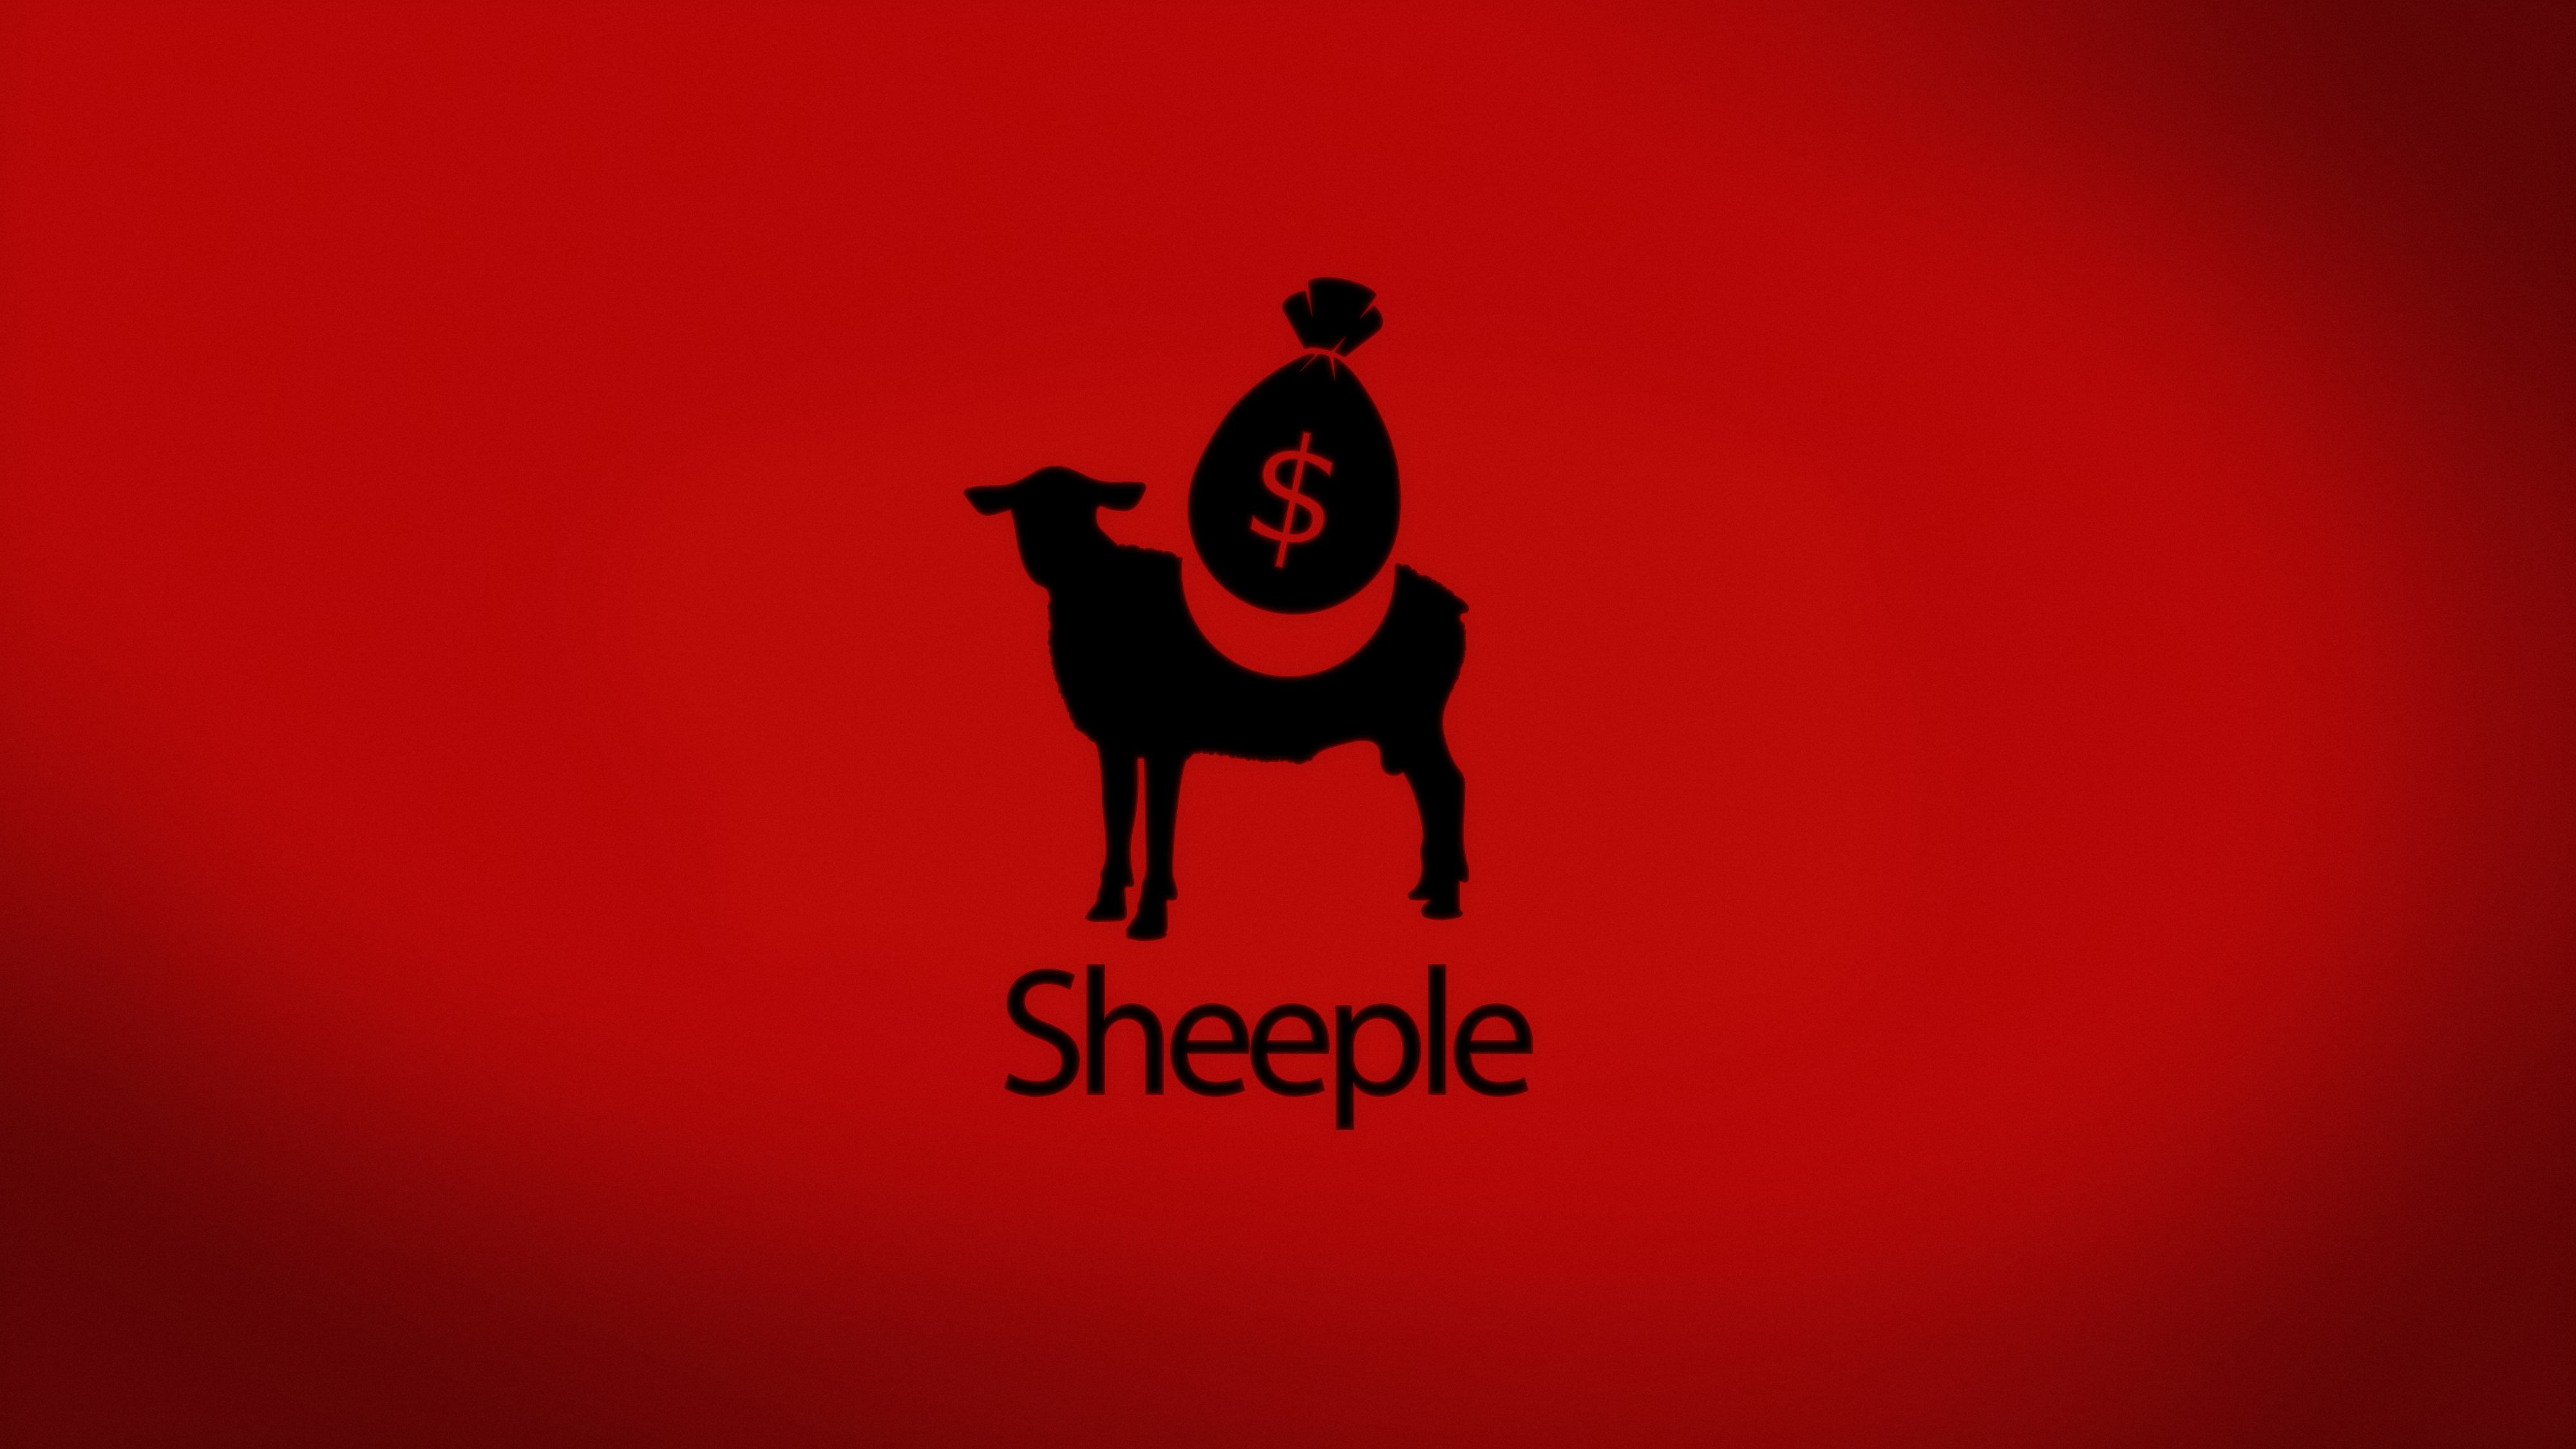 1080p Sheeple Hd Images